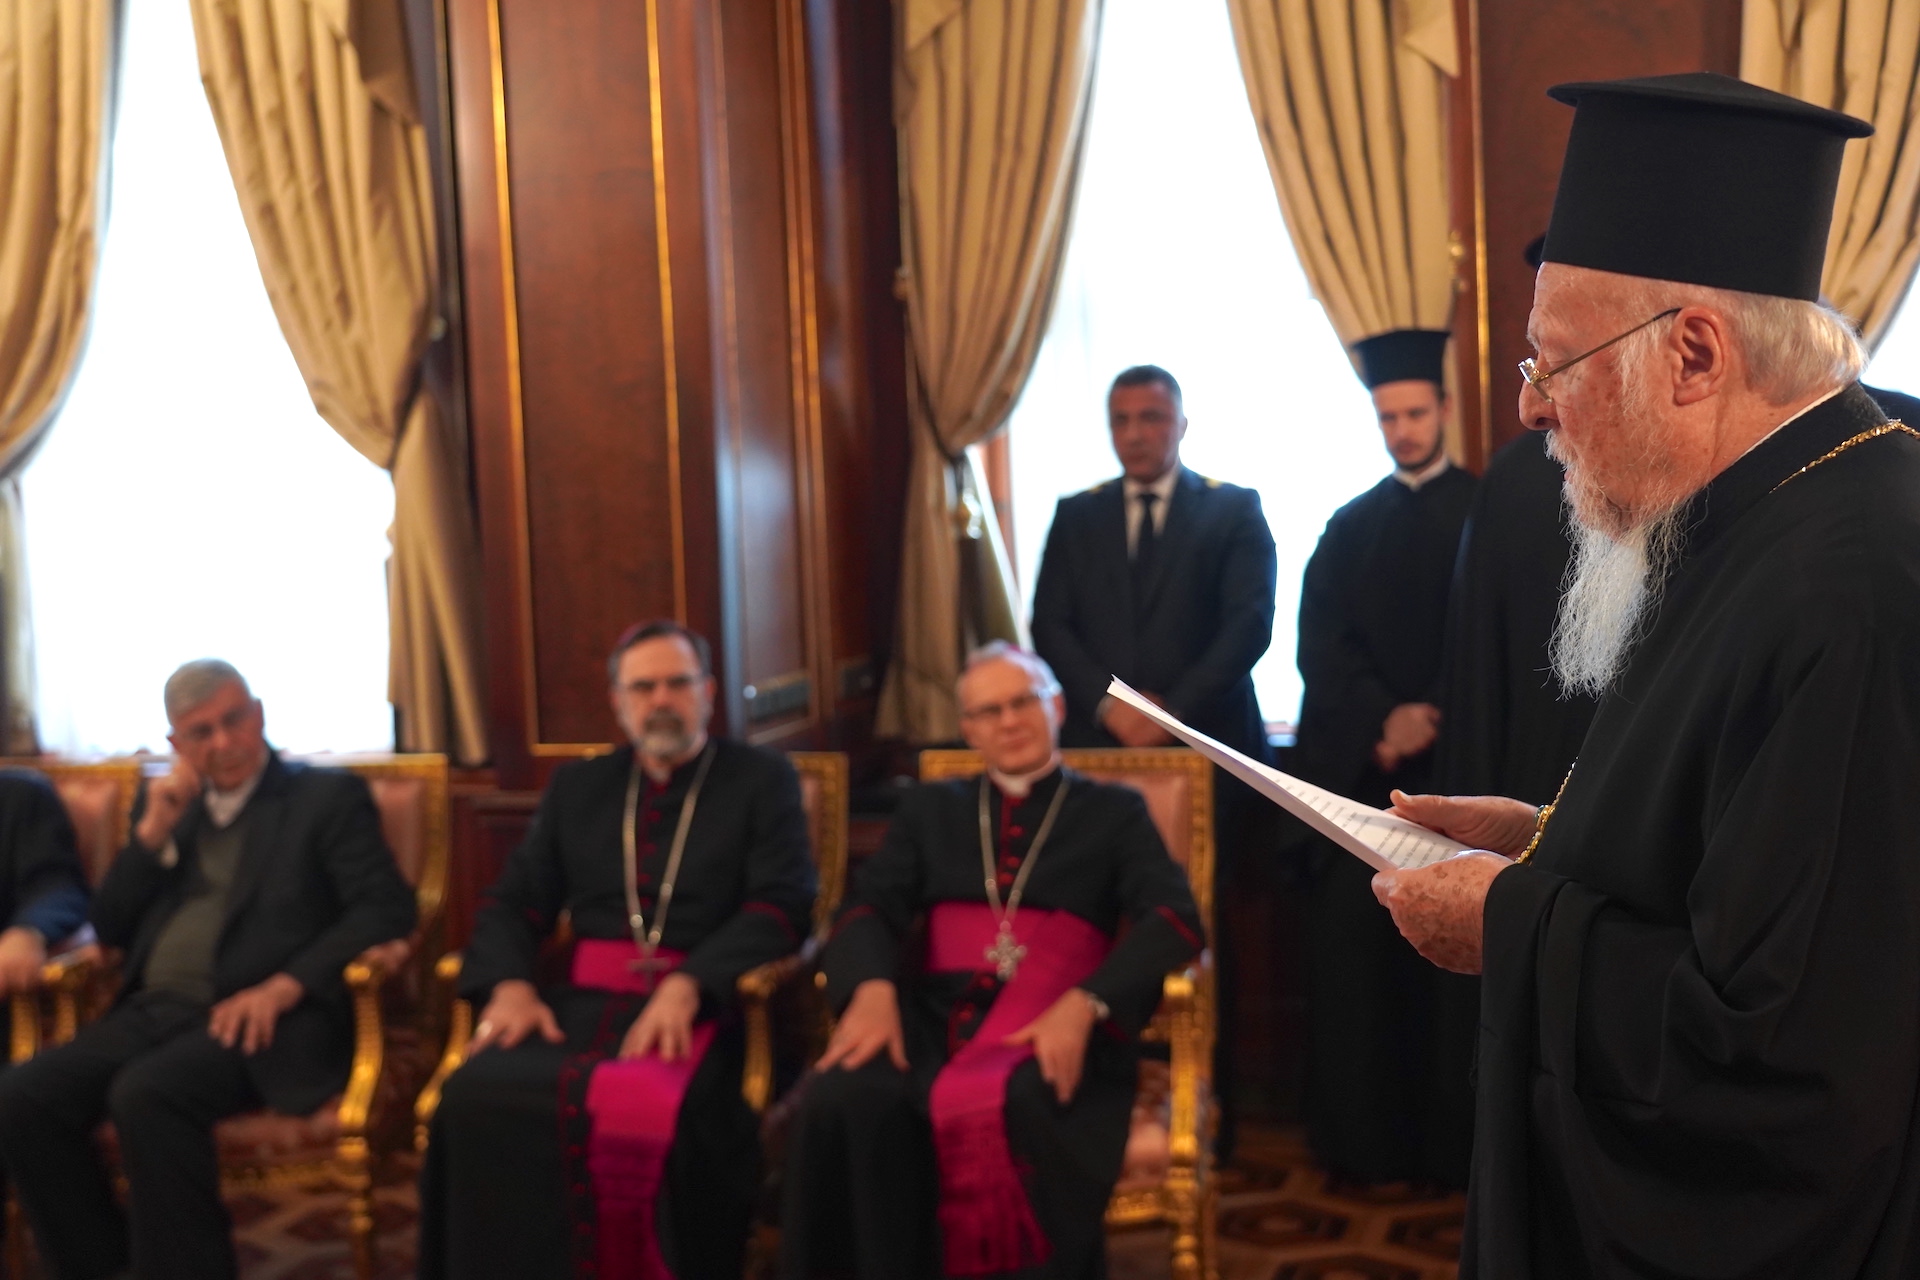 Group of Roman Catholic Hierarchs and clergy visit the Ecumenical Patriarch at the Phanar